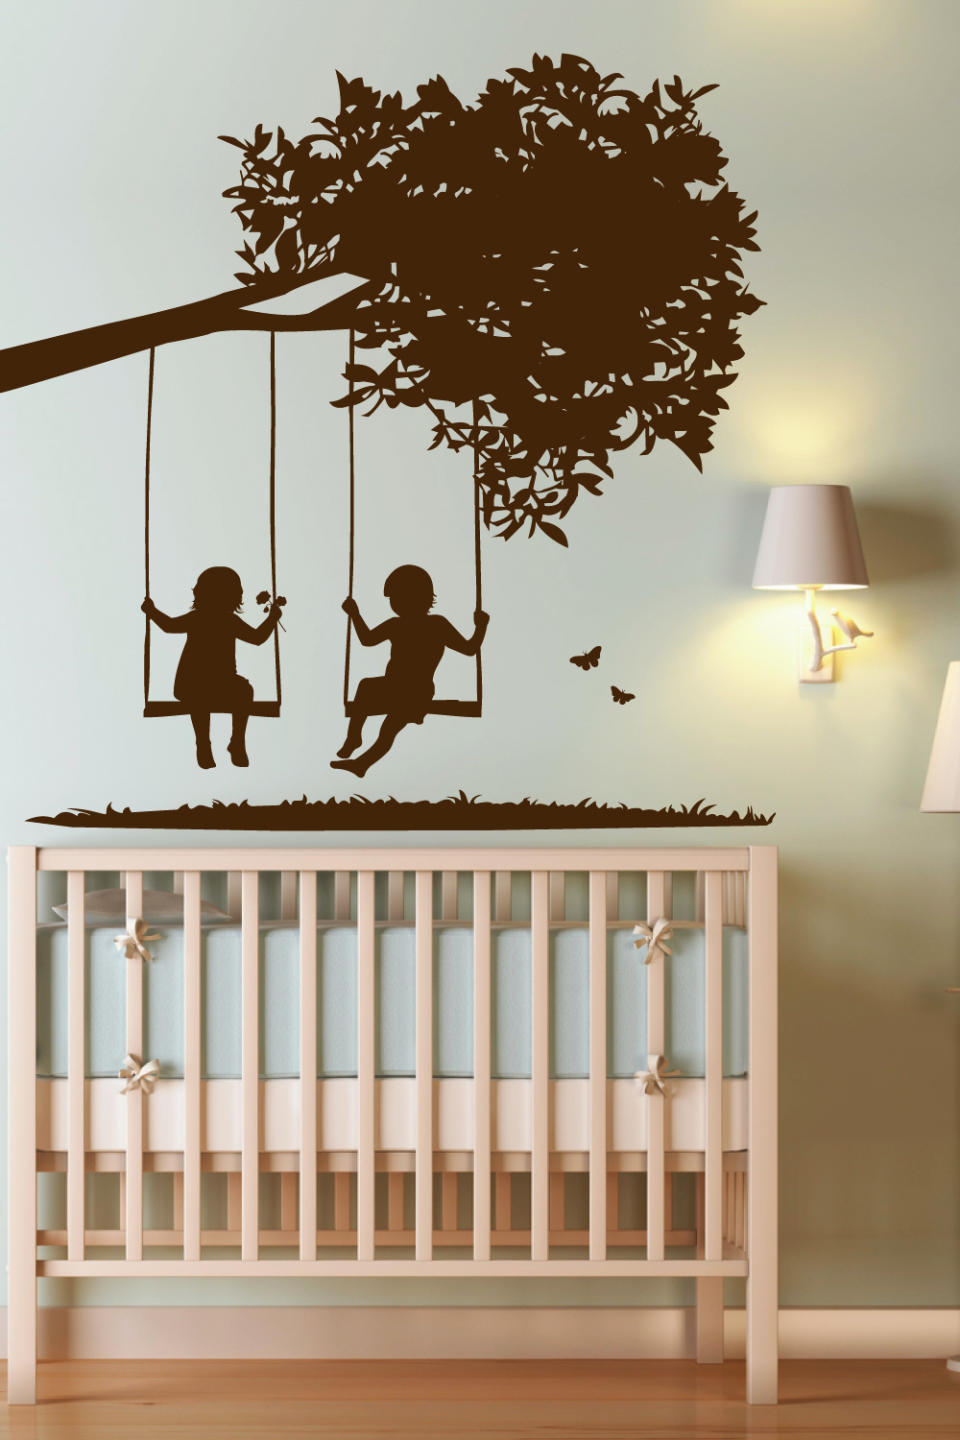 This undated publicity photo shows WALLTAT.com's "Kids on Swings" decal, a popular choice for parents decorating nurseries. Parents like the flexibility of wall decals that can be easily changed as kids grow. (AP Photo/Courtesy of WALLTAT.com)